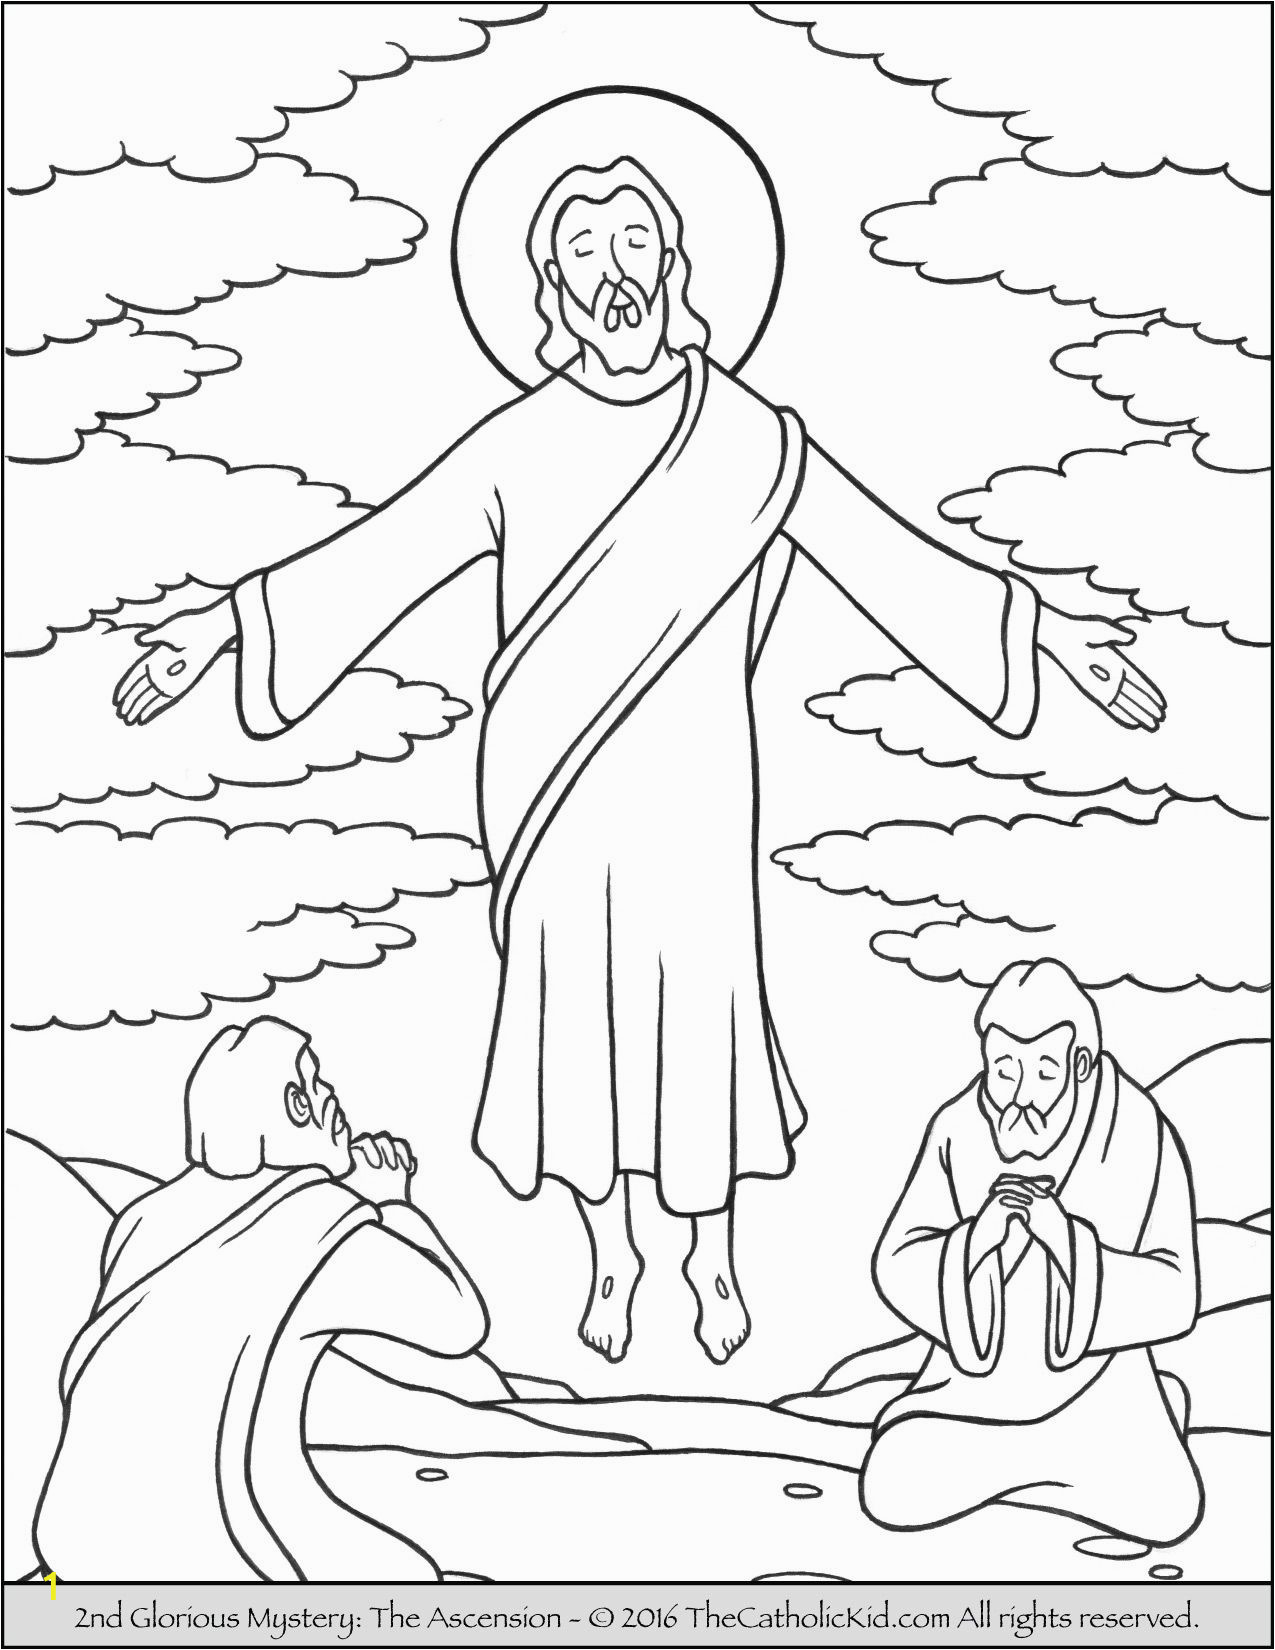 Bible Coloring Pages Mary and Martha Coloring Book Remarkableary andartha Coloring Page Picture